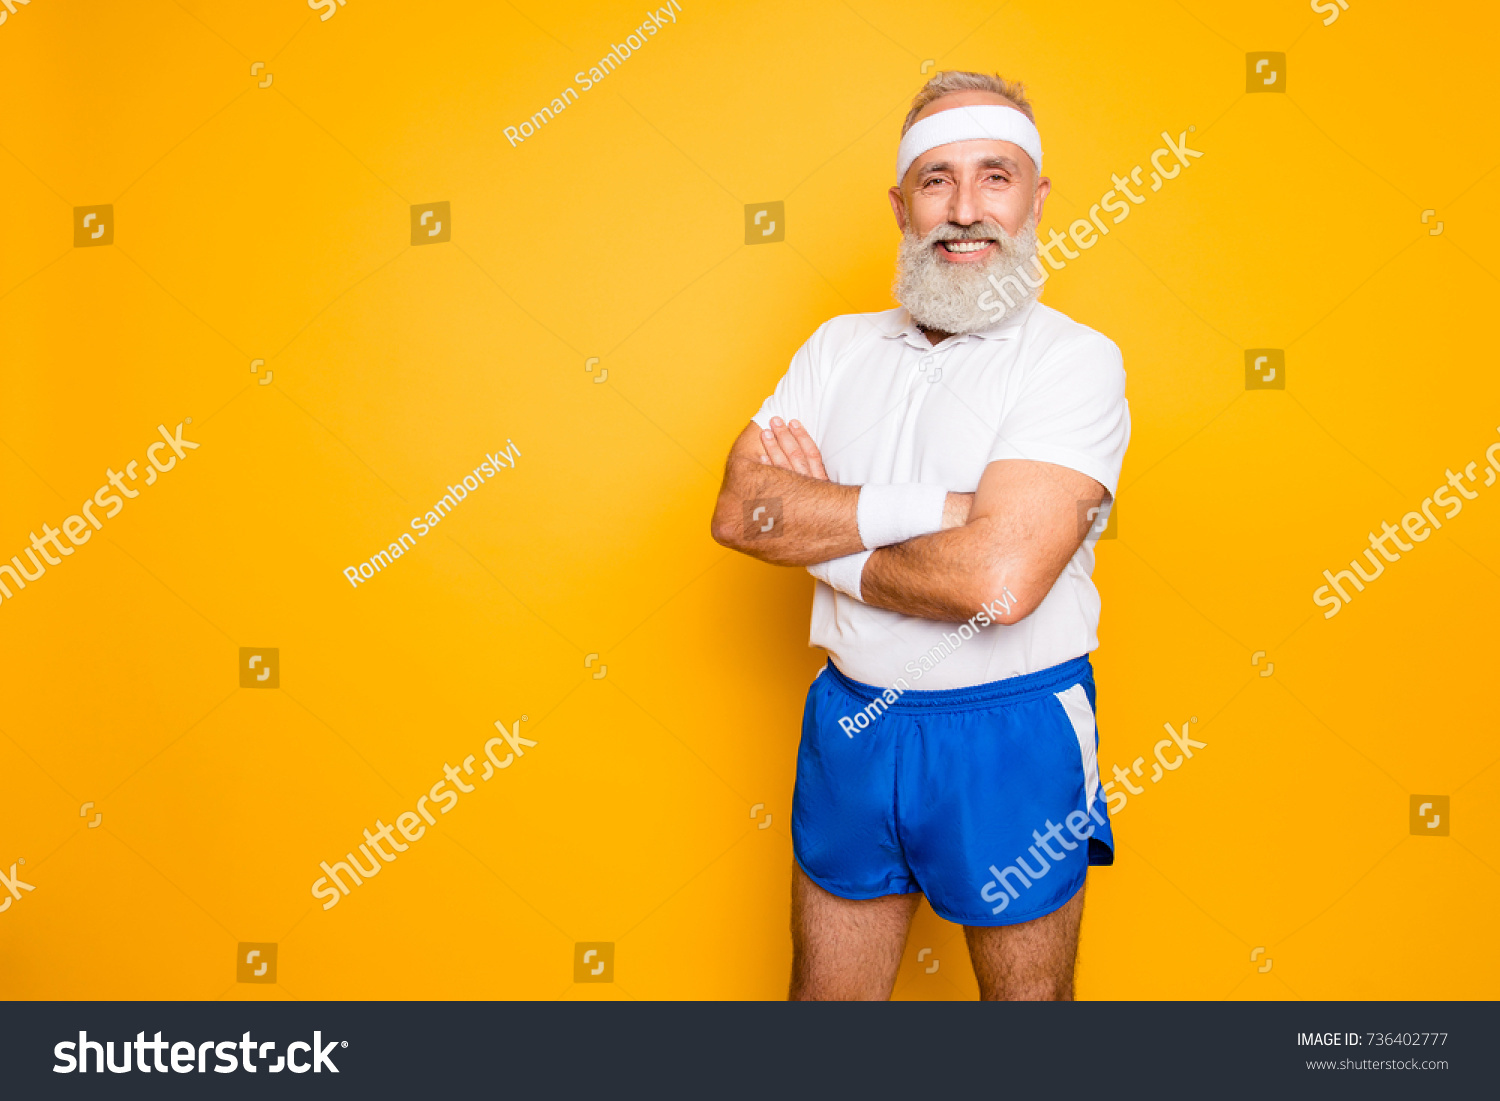 Mature modern cool grey haired macho competetive pensioner grandpa, leader, champion. Bodycare, healthcare, weight loss, pride, strength, leadership, motivation, advertising, happiness lifestyle #736402777